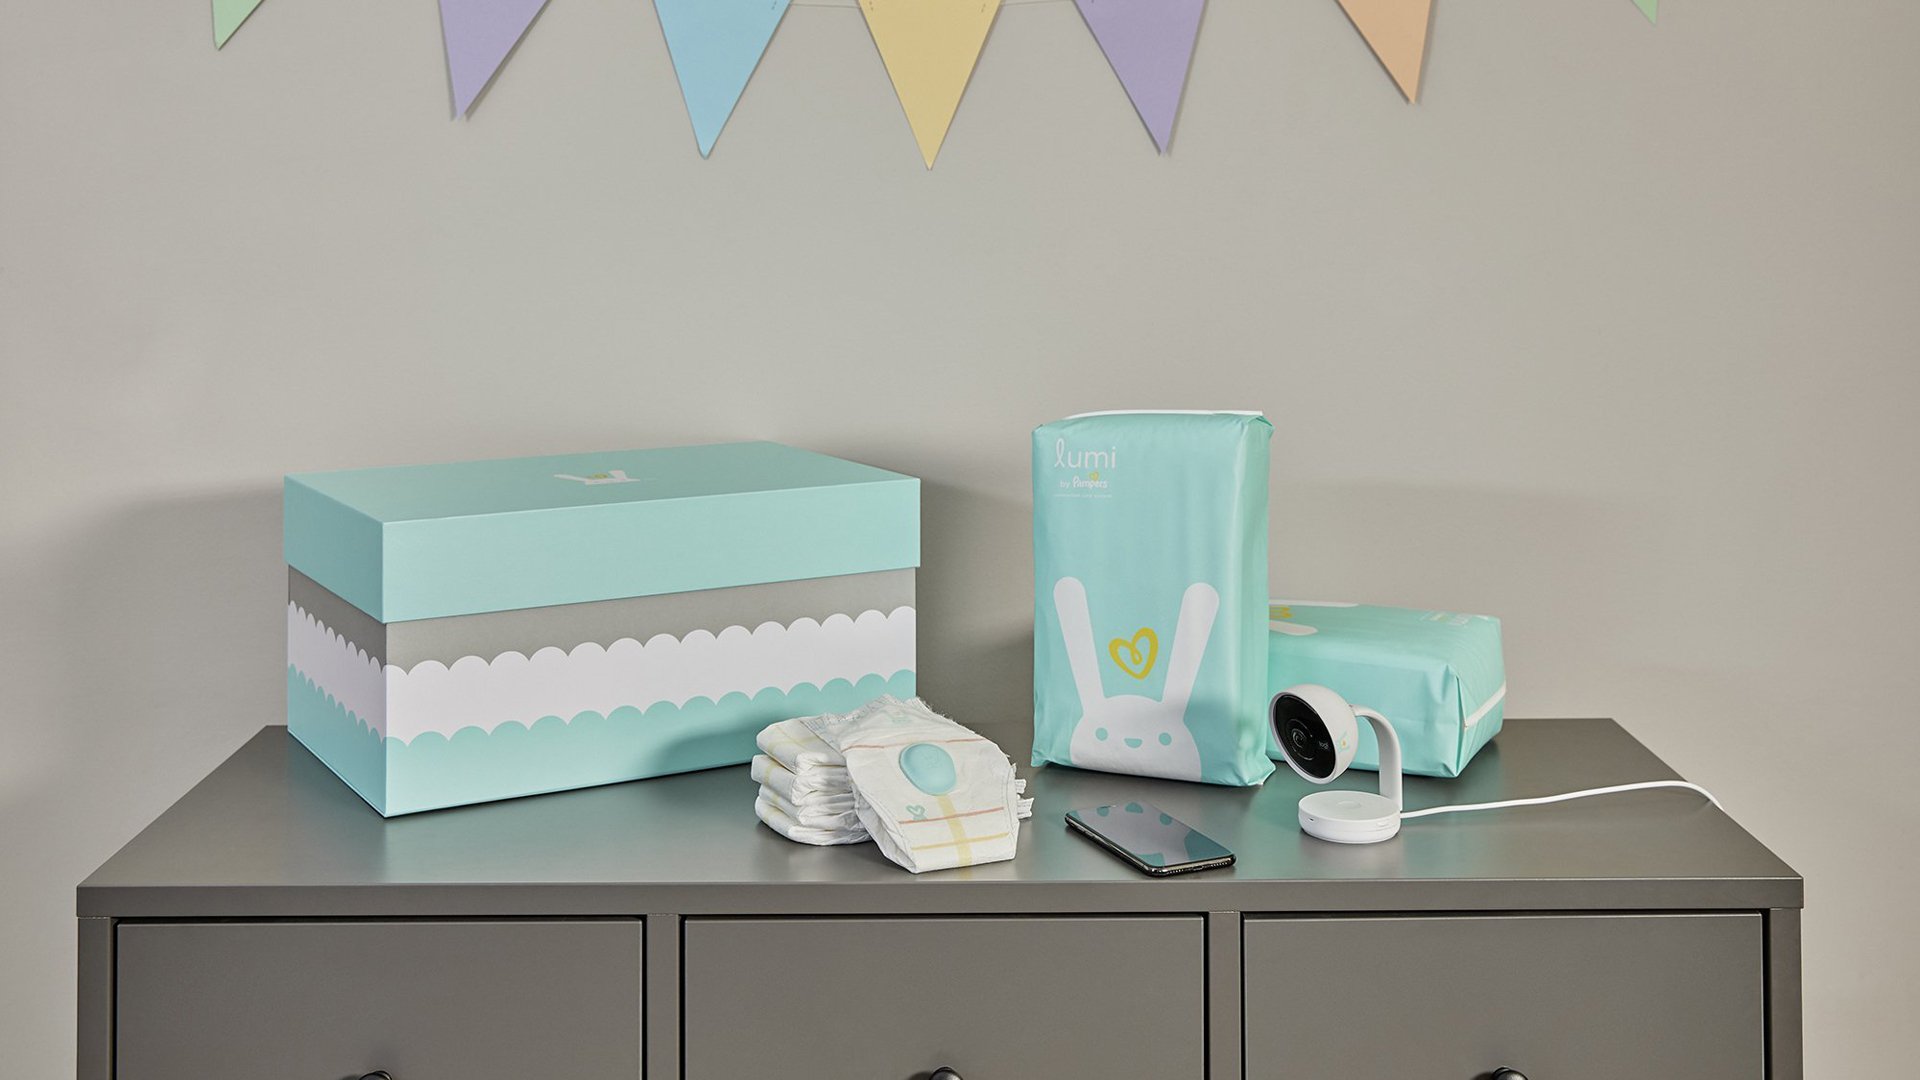 The Lumi by Pampers line is seen in an image from Pampers.